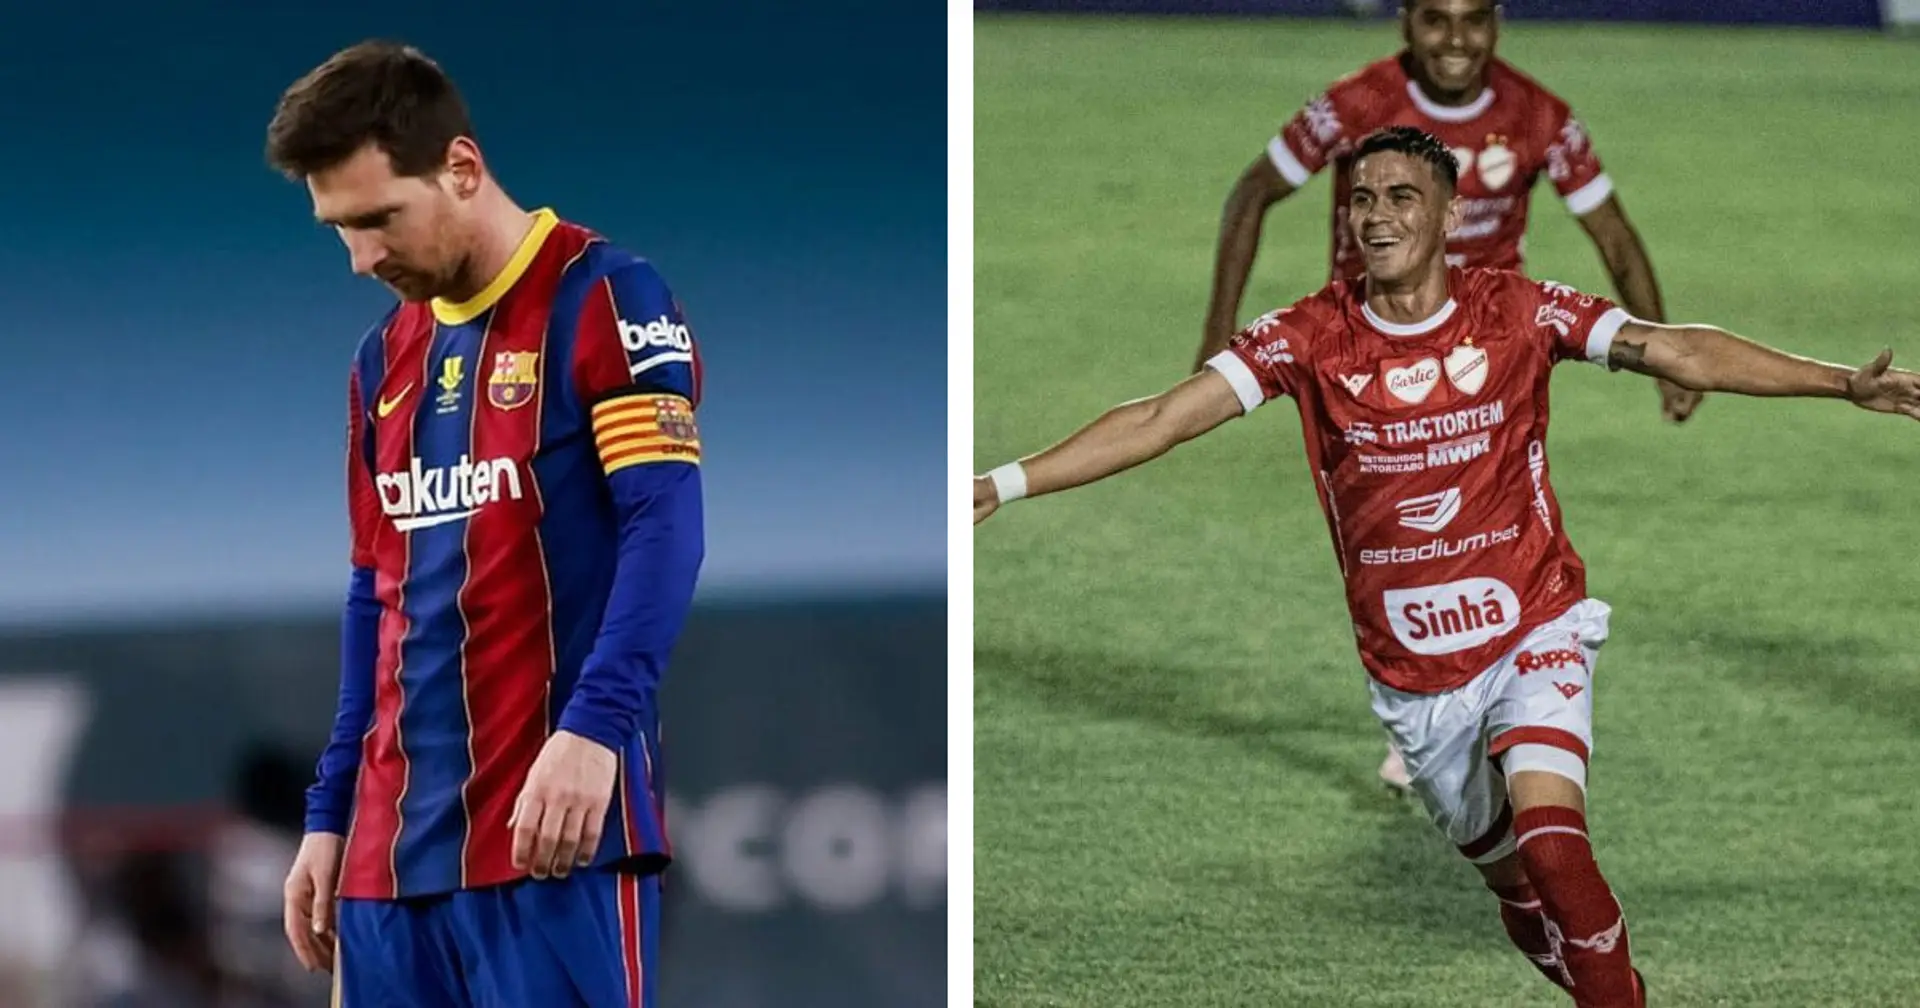 Runs in the family? Messi's cousin manages promotion-leading goal and red card inside 6 minutes